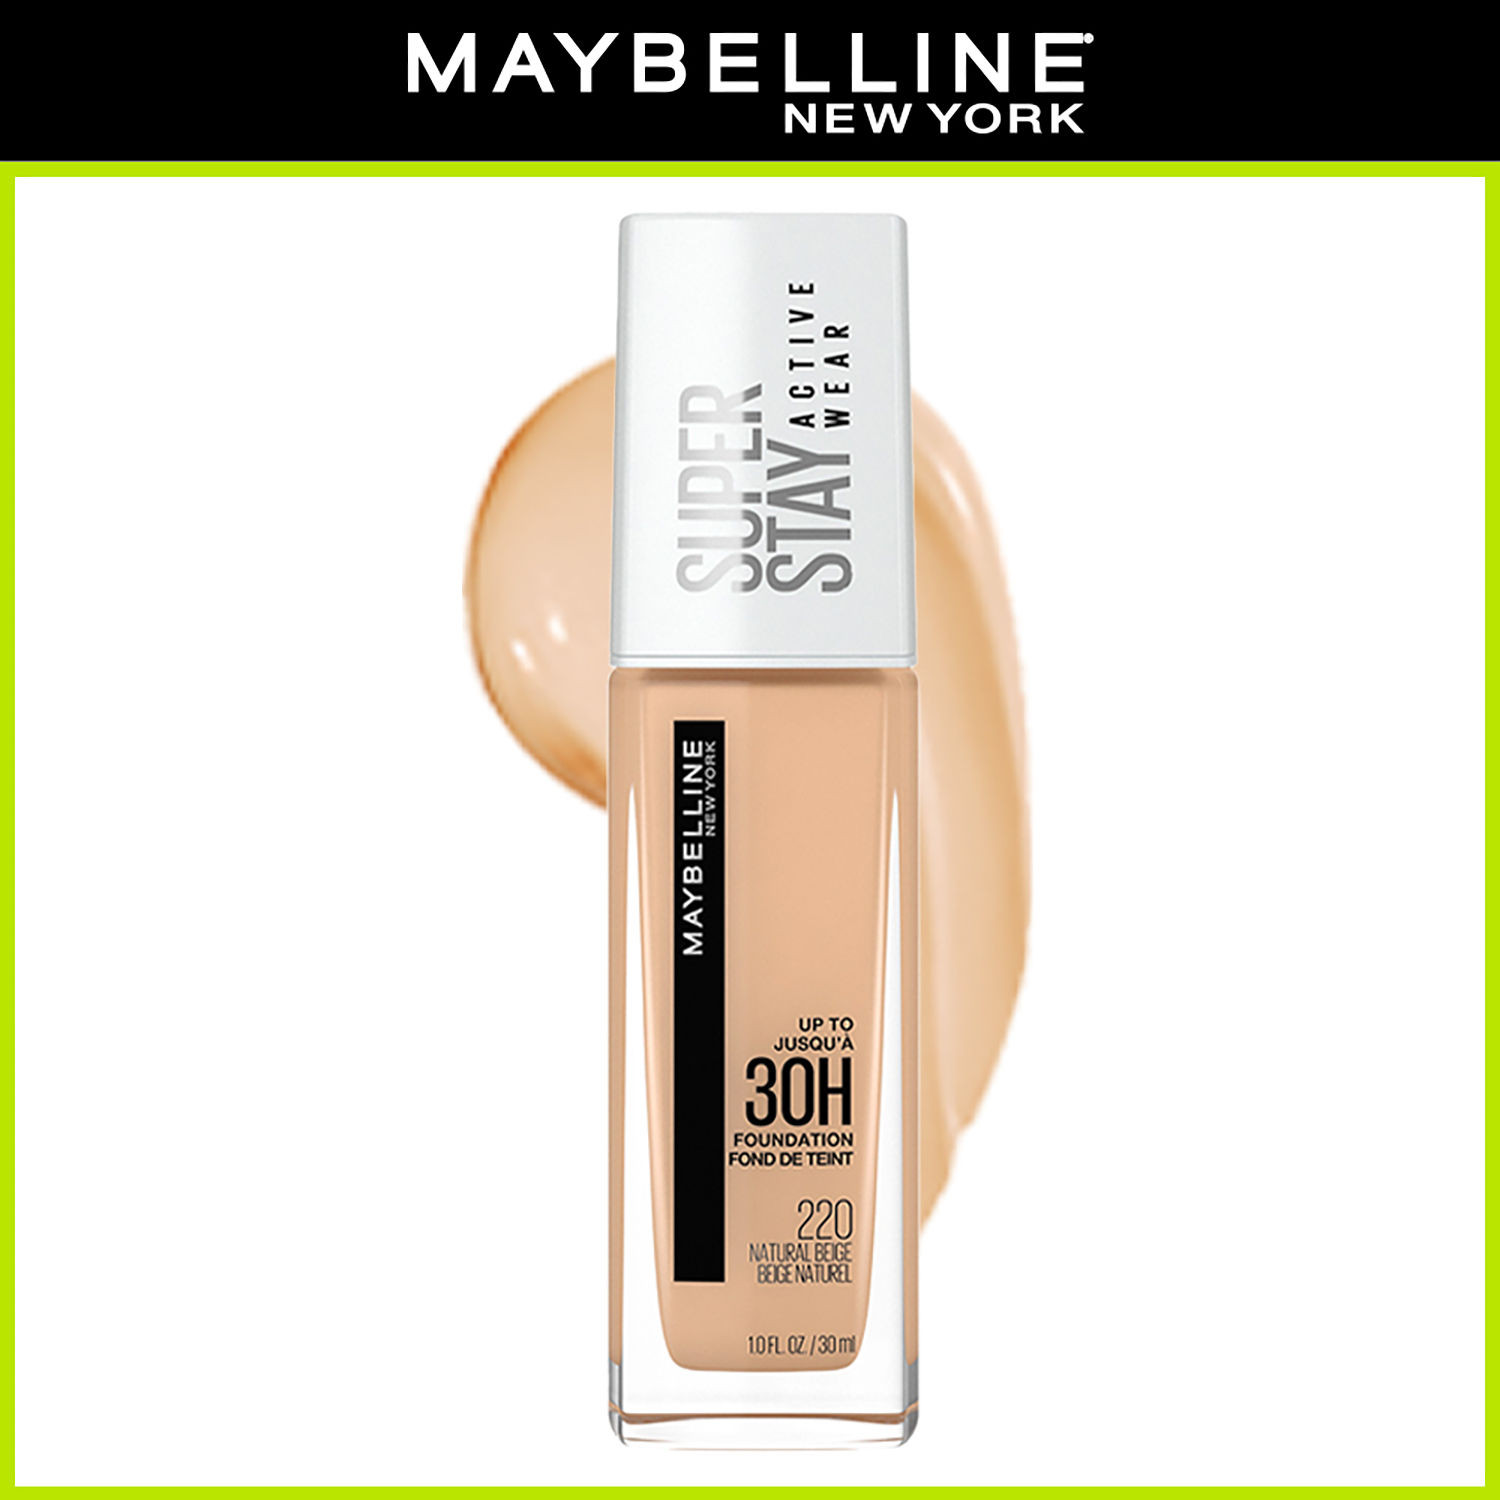 Maybelline New York Super Stay Full Coverage Active Wear Liquid Foundation,  Matte Finish with 30 HR Wear, Transfer Proof 220, Natural Beige, 30ml